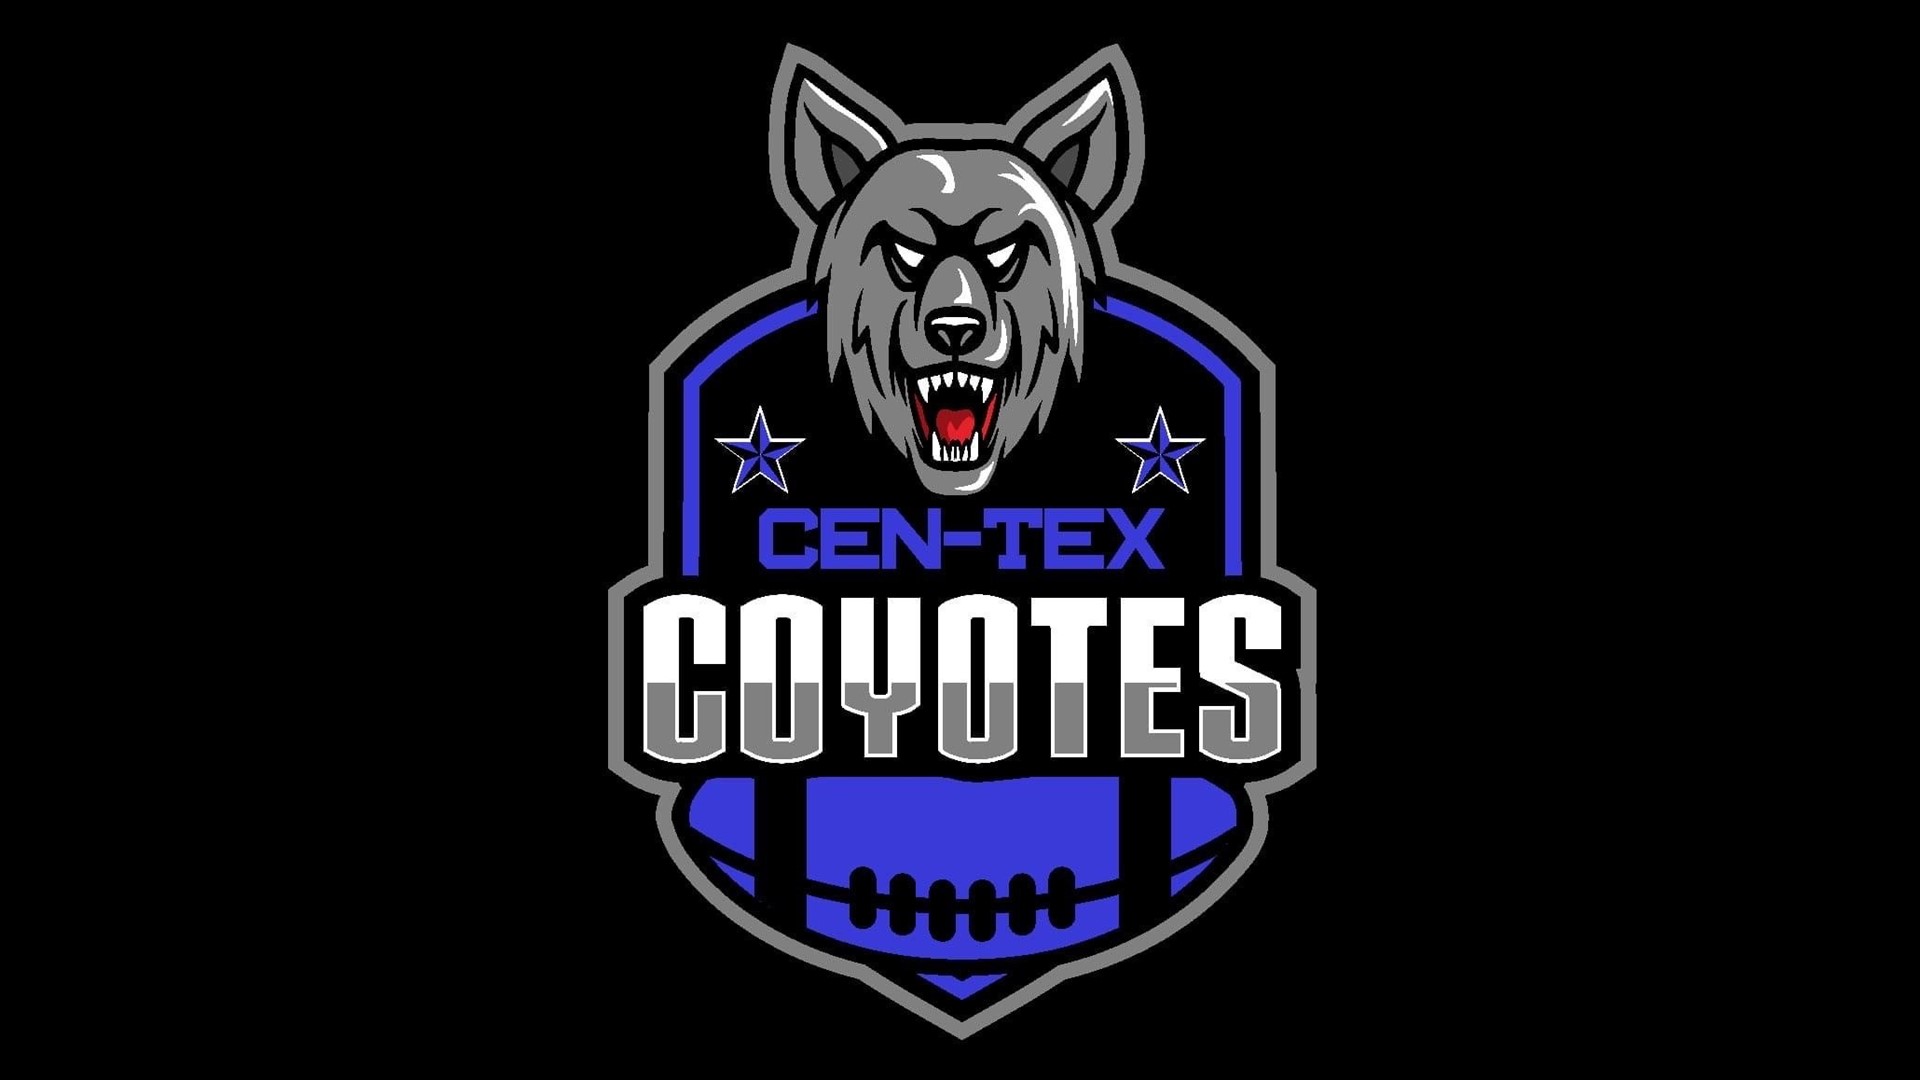 Cen-Tex Coyotes hope to kick off in their season August.